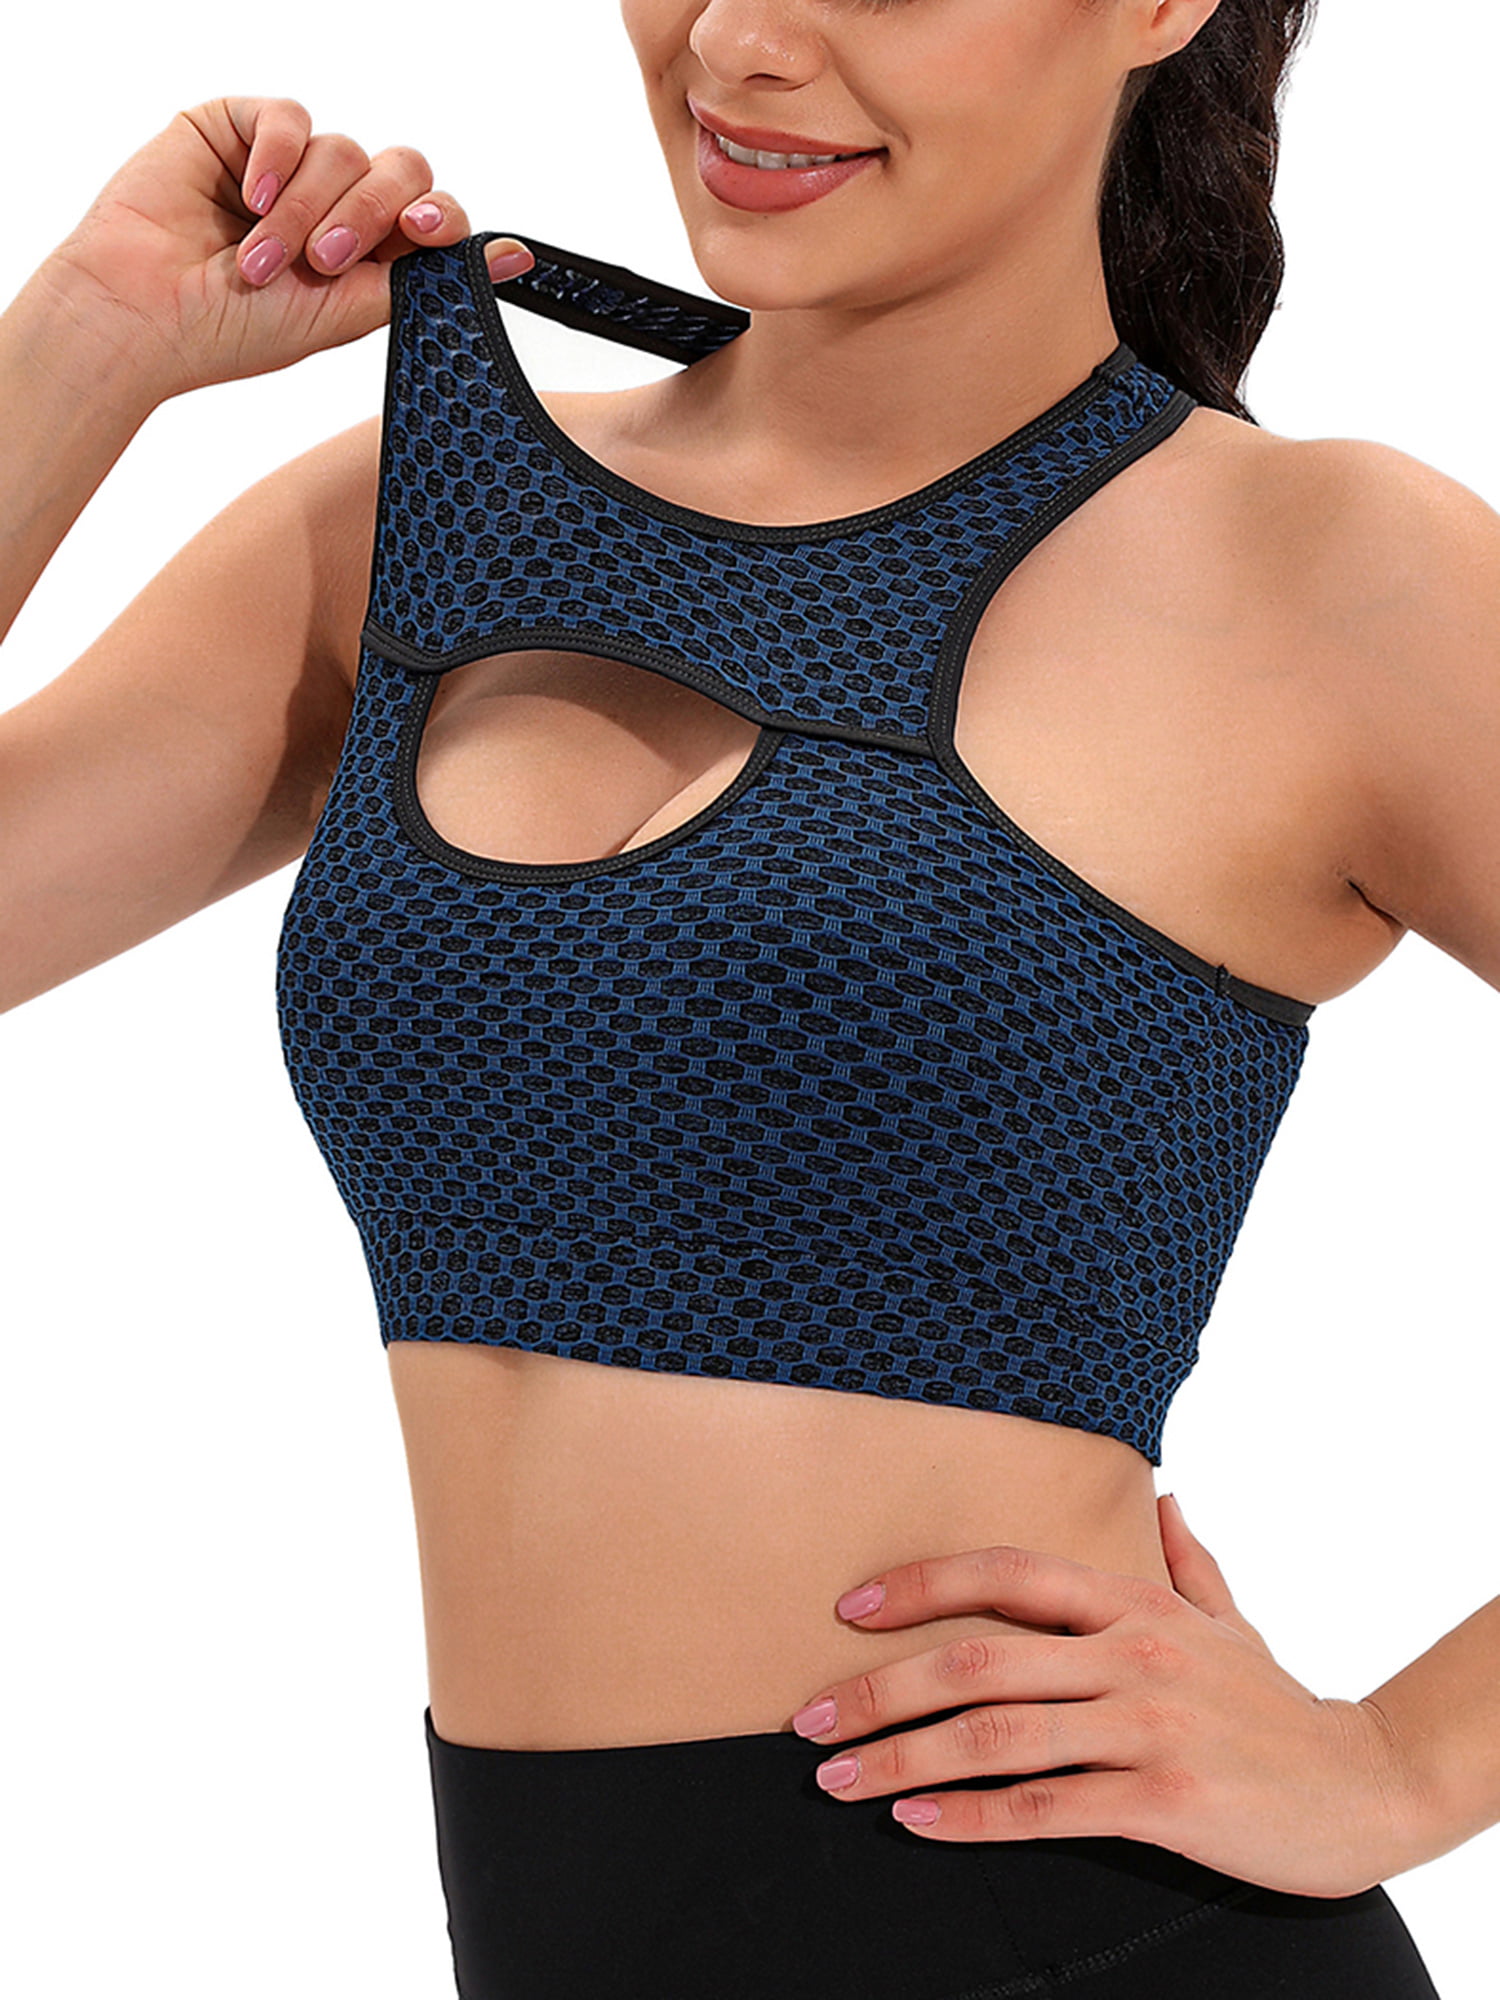 FUTATA Racer Back Design Seamless Sports Bra, Women's Yoga Bra Sexy Cutout  Cropped Crop Top, Medium Support Workout Fitness Running Sportswear with  Removable Pads 